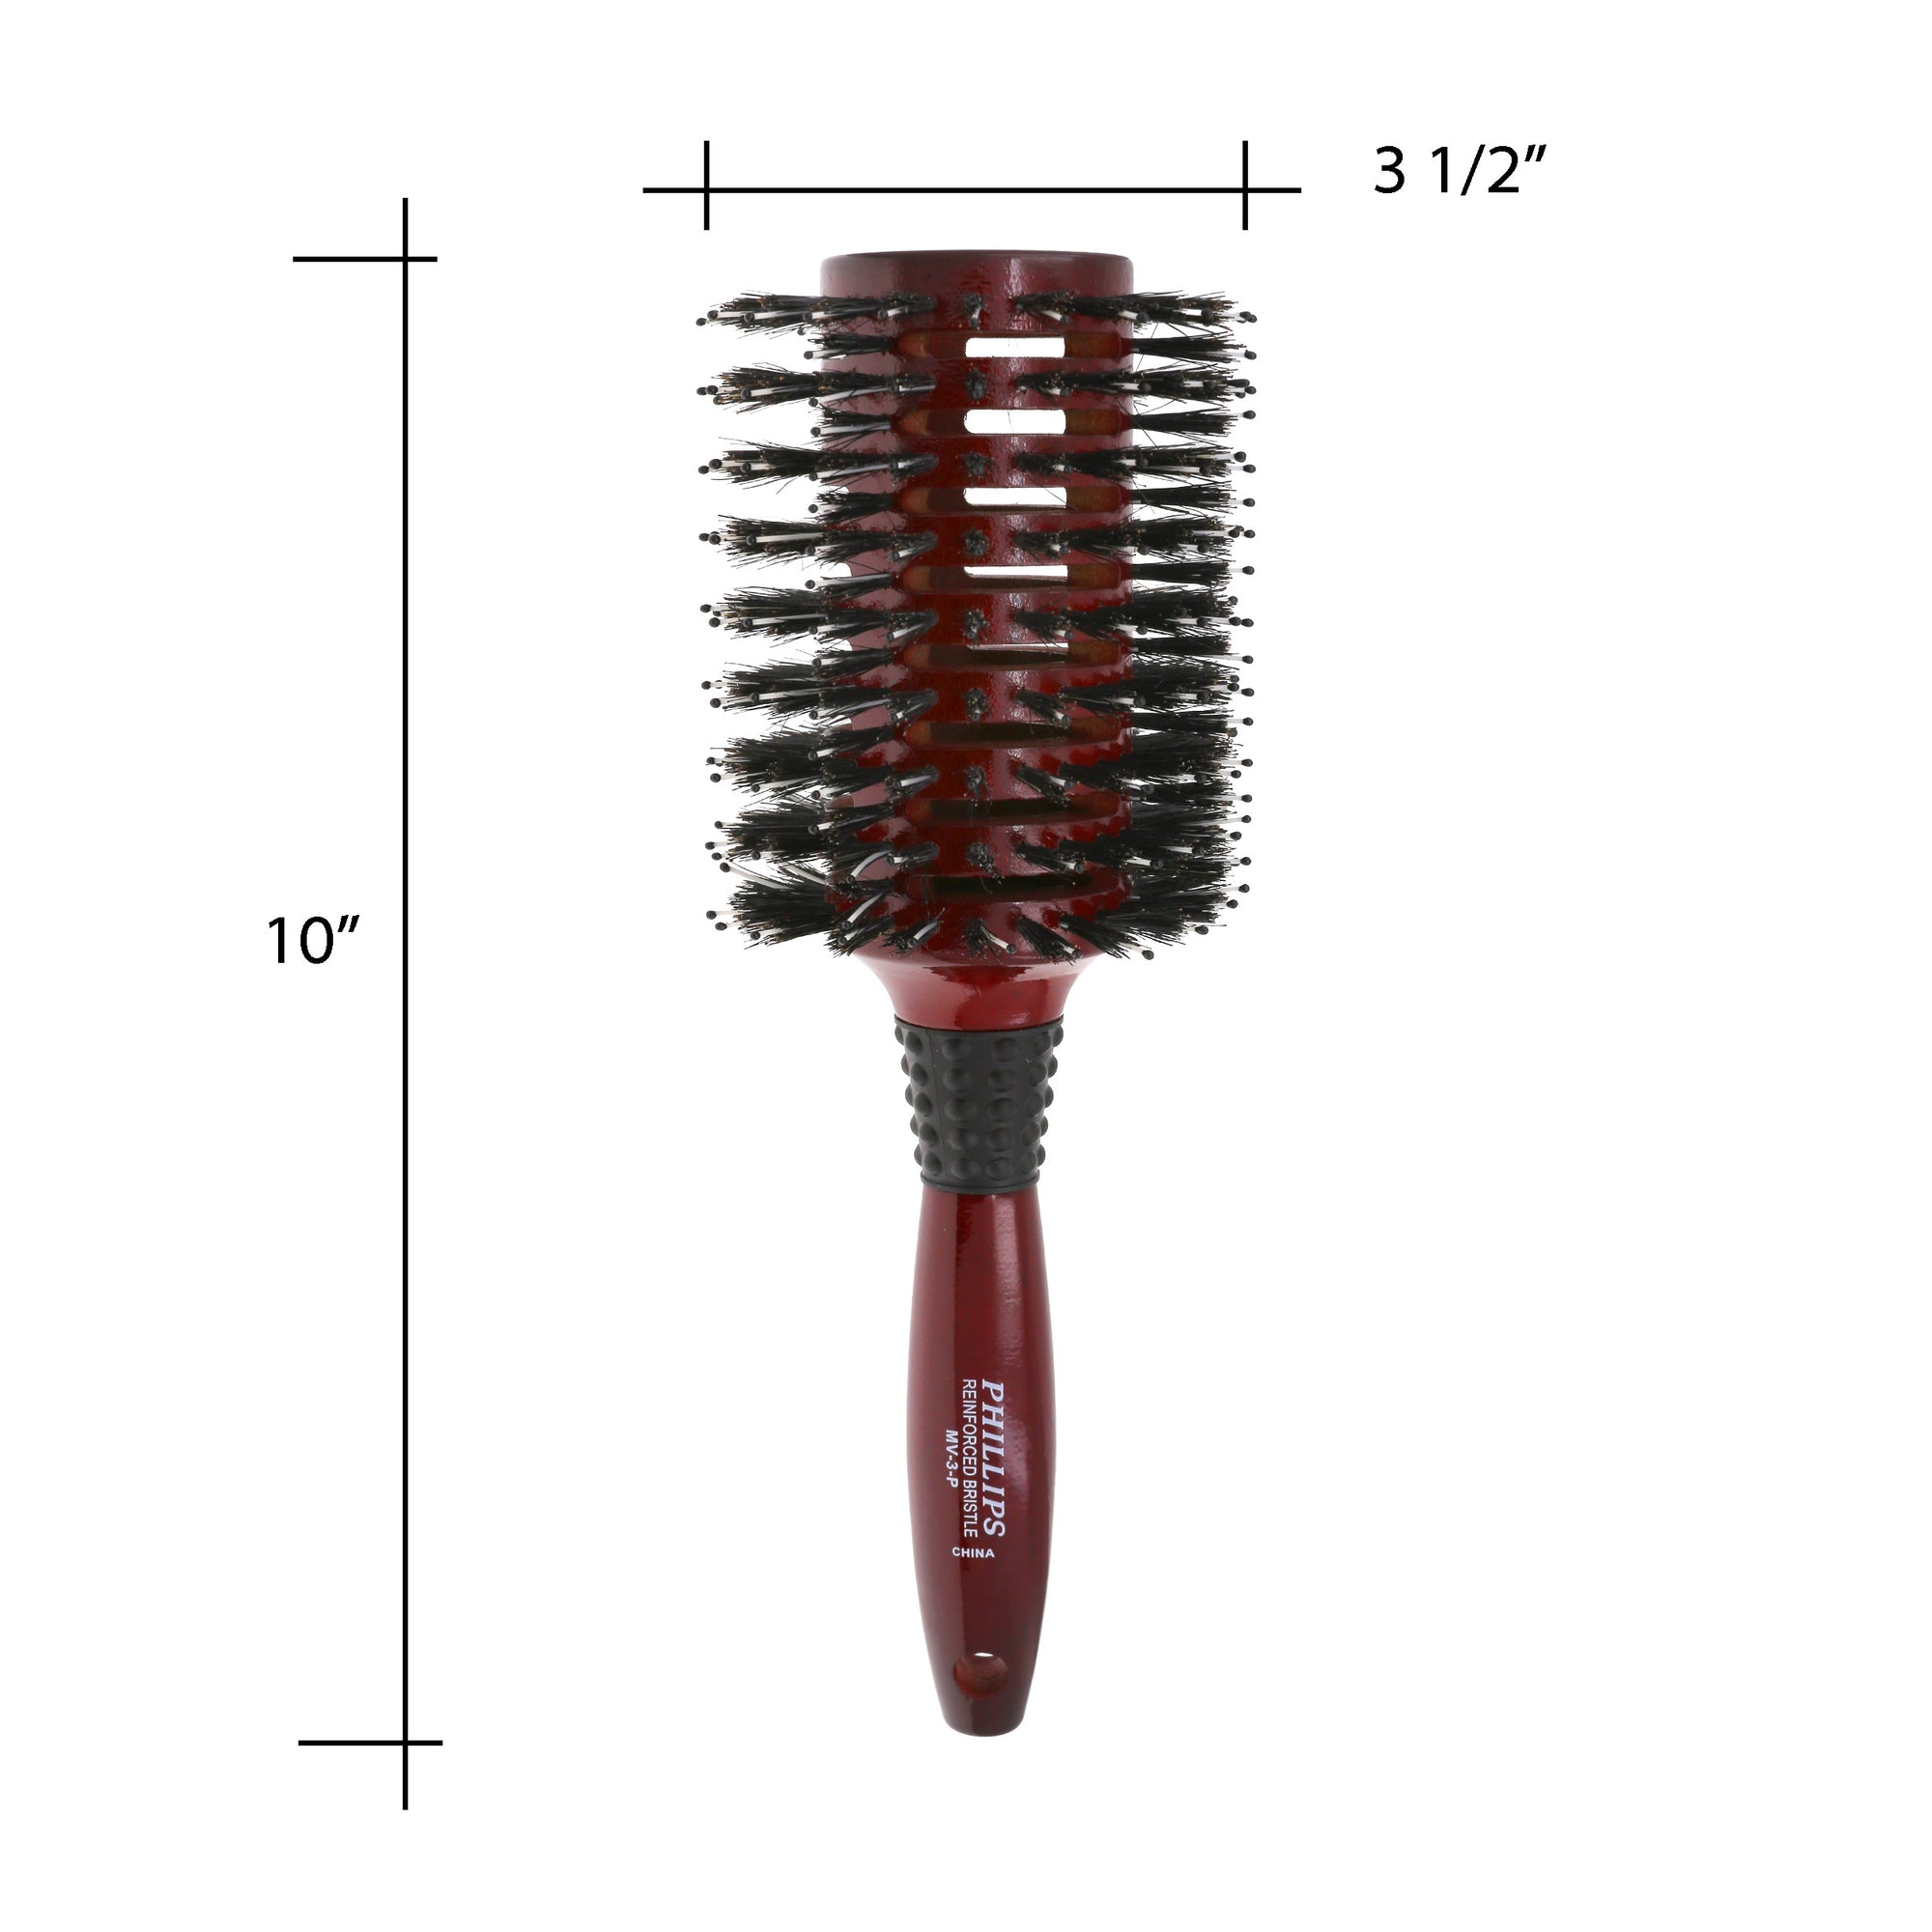 3.5" Ball-Tipped Nylon and Boar Bristle Round Hair Brush